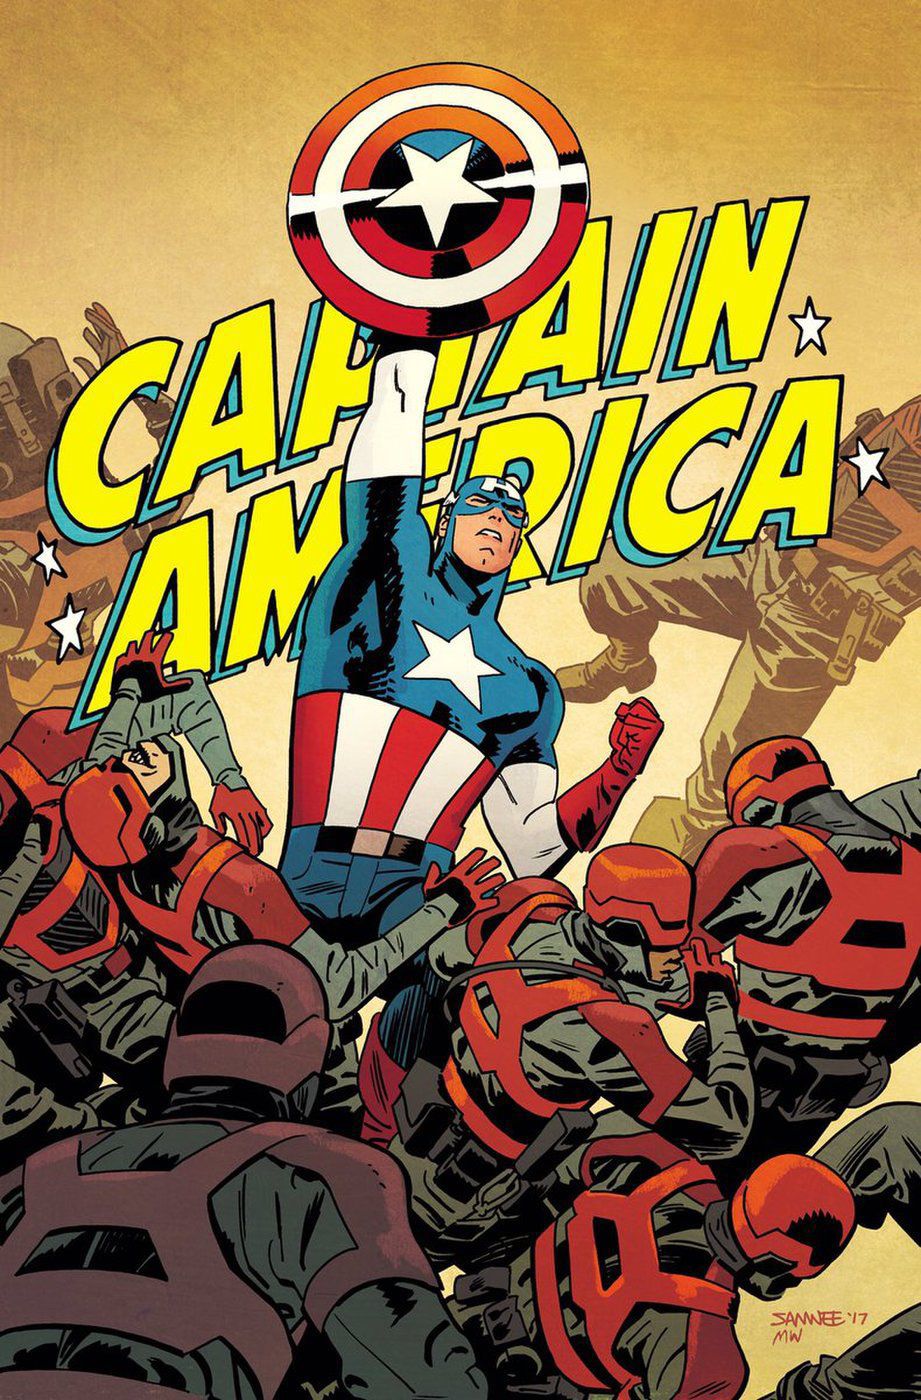 The Captain America apology tour begins in this week's comics